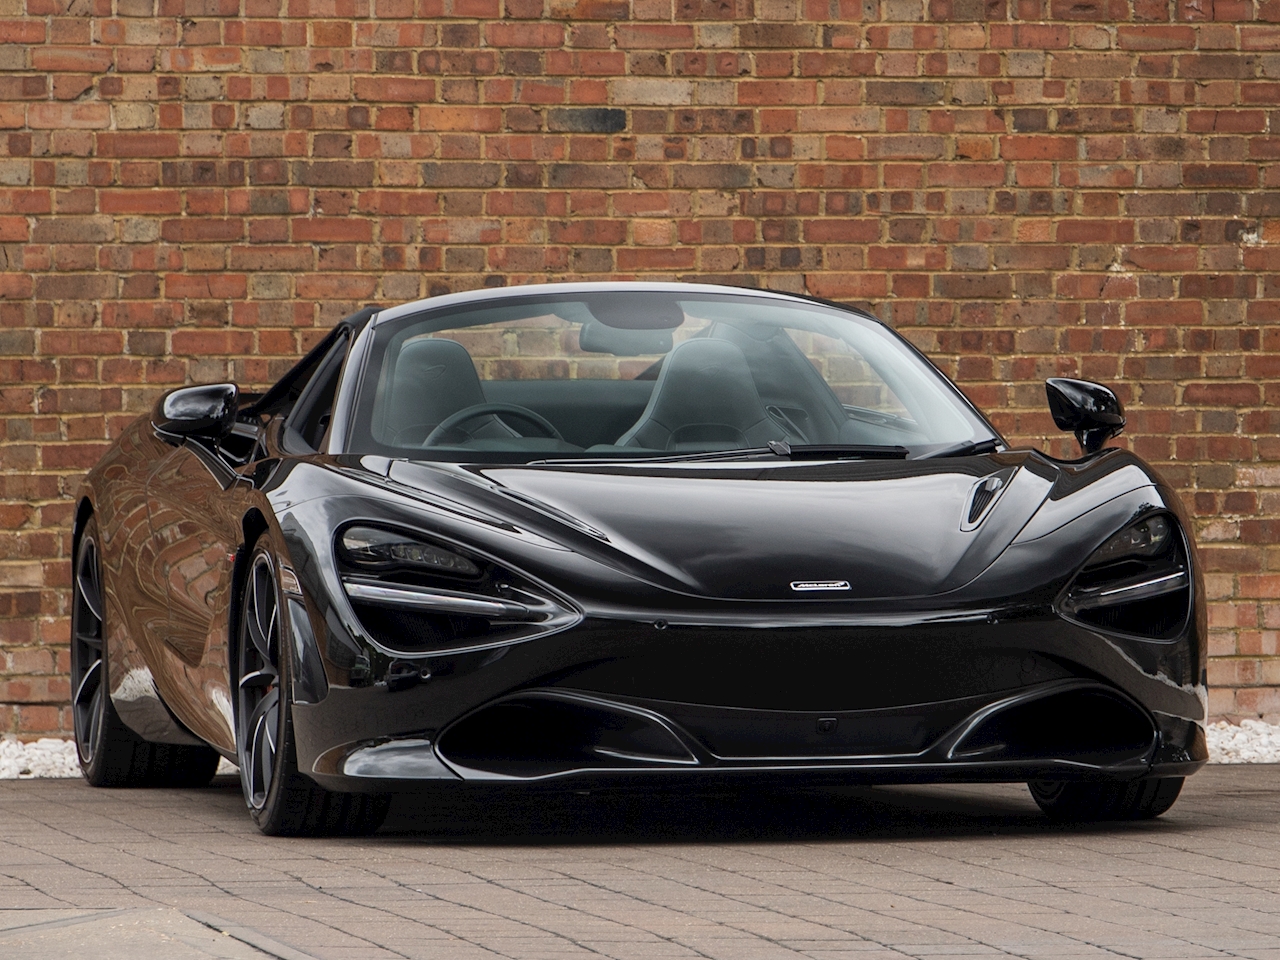 2020 Used McLaren 720S 4.0T V8 Spider 2dr Petrol SSG (s/s) (720 ps ...